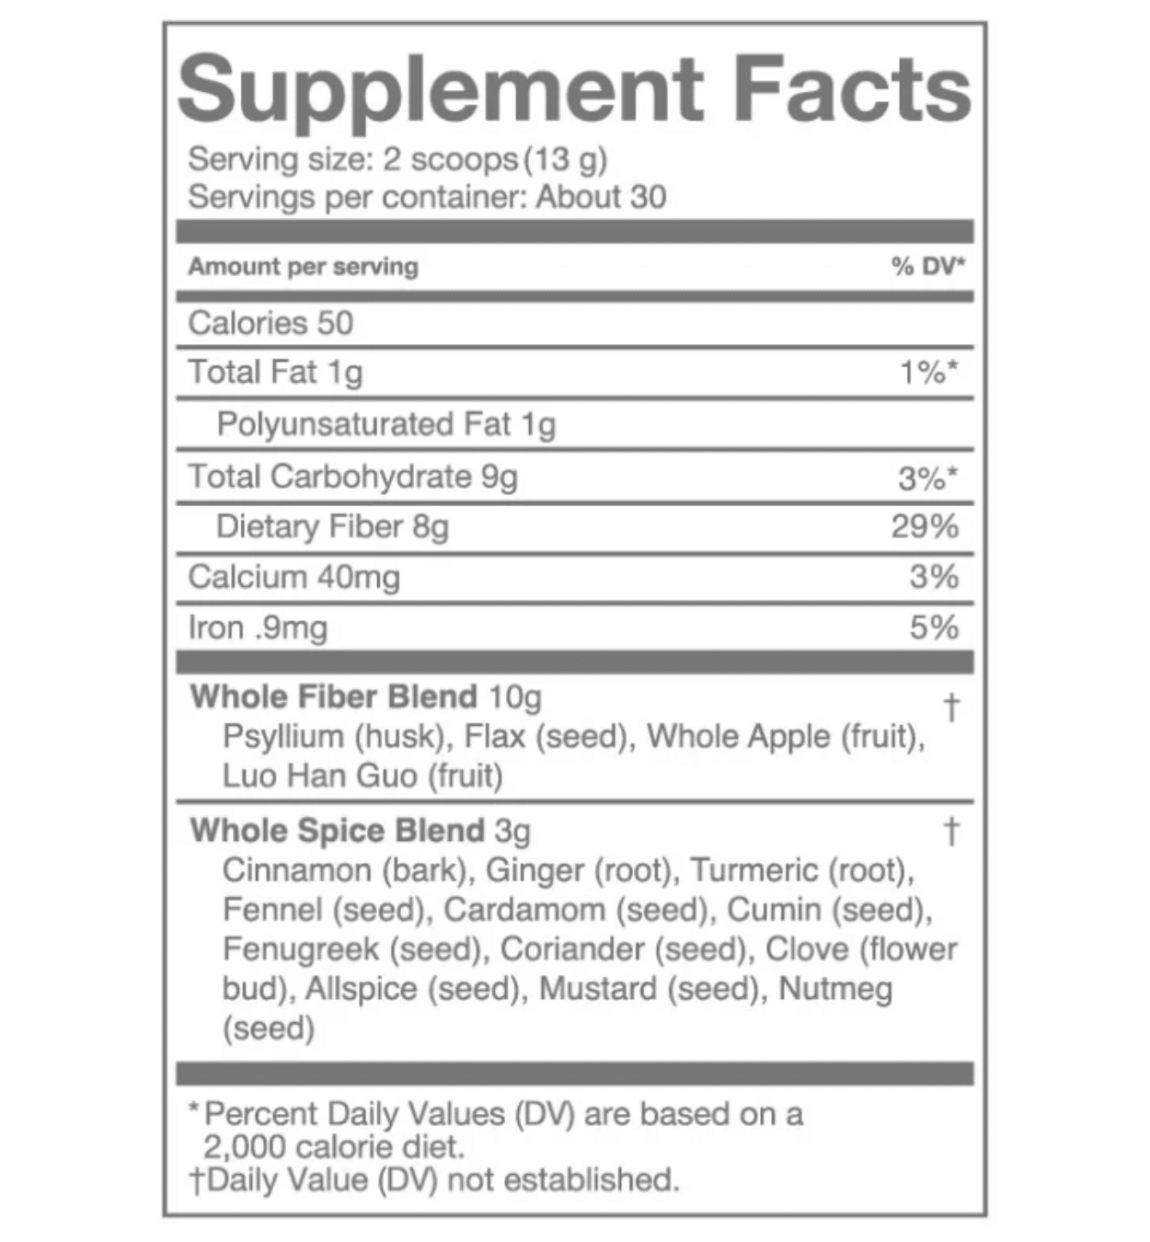 Fibre-Spice-Supplement-Balance-Of-Nature-Ingredients.png